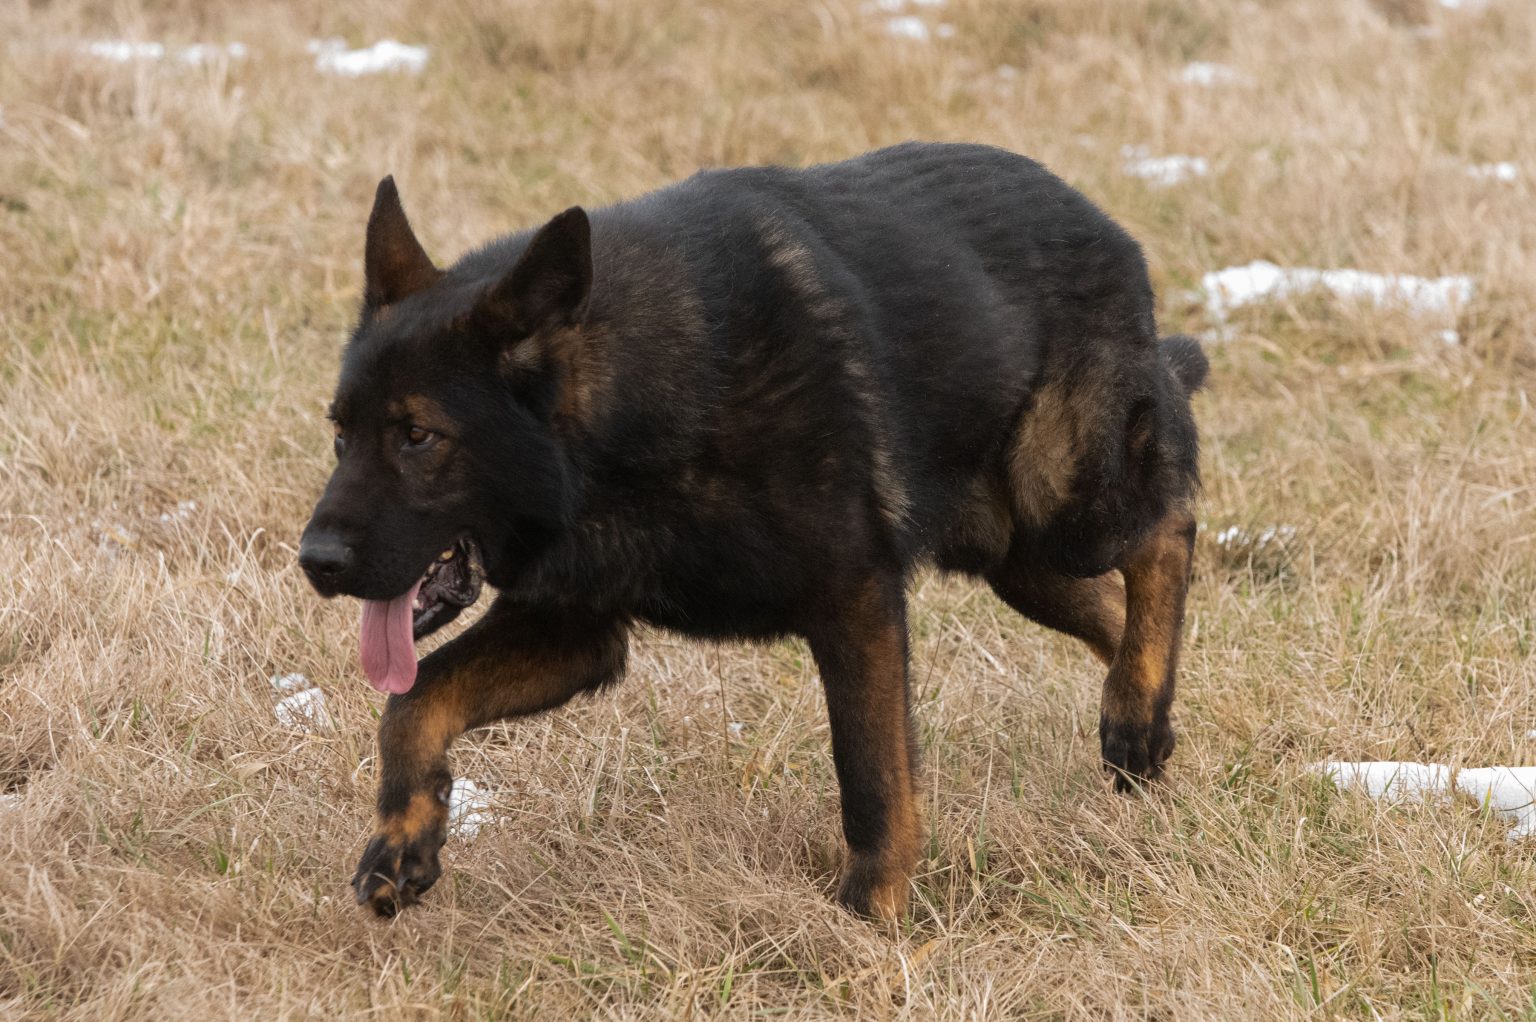 Ares STASI, 1 year old DDR Male